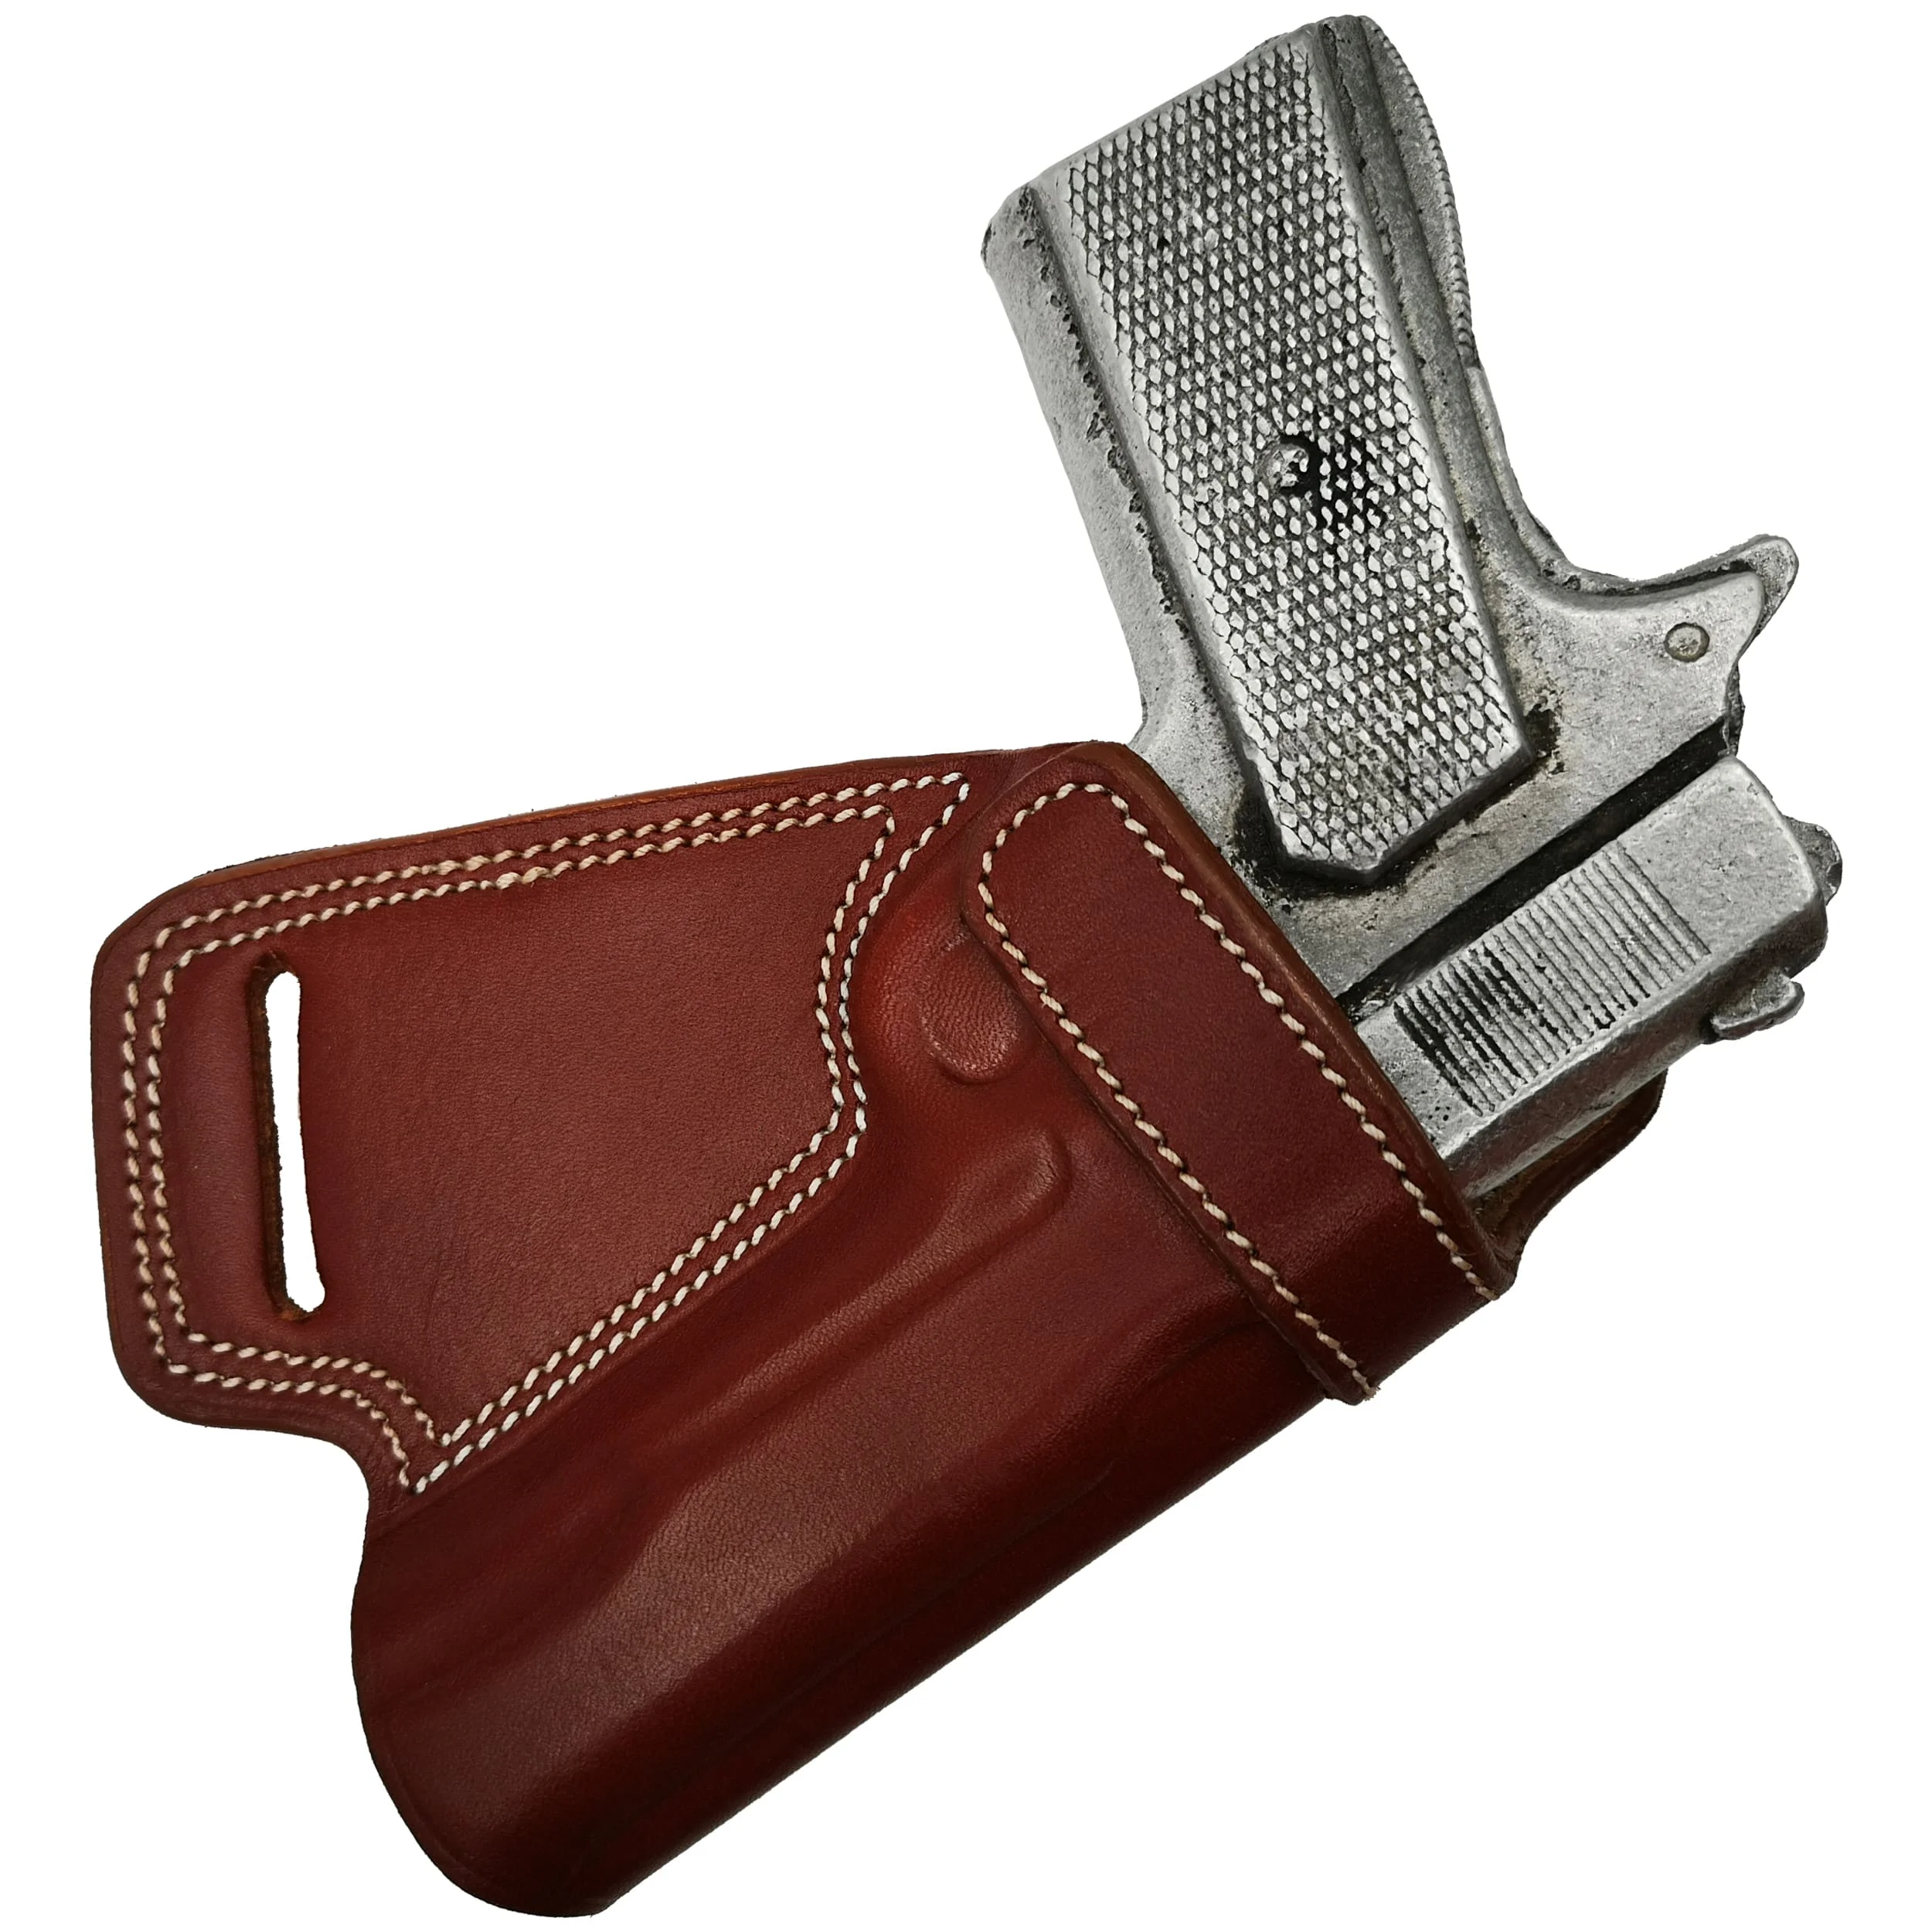 

Glock 17 Compatible Real Leather Holster Small Of Back Quick Release Cross Draw Gun Pouch Brown